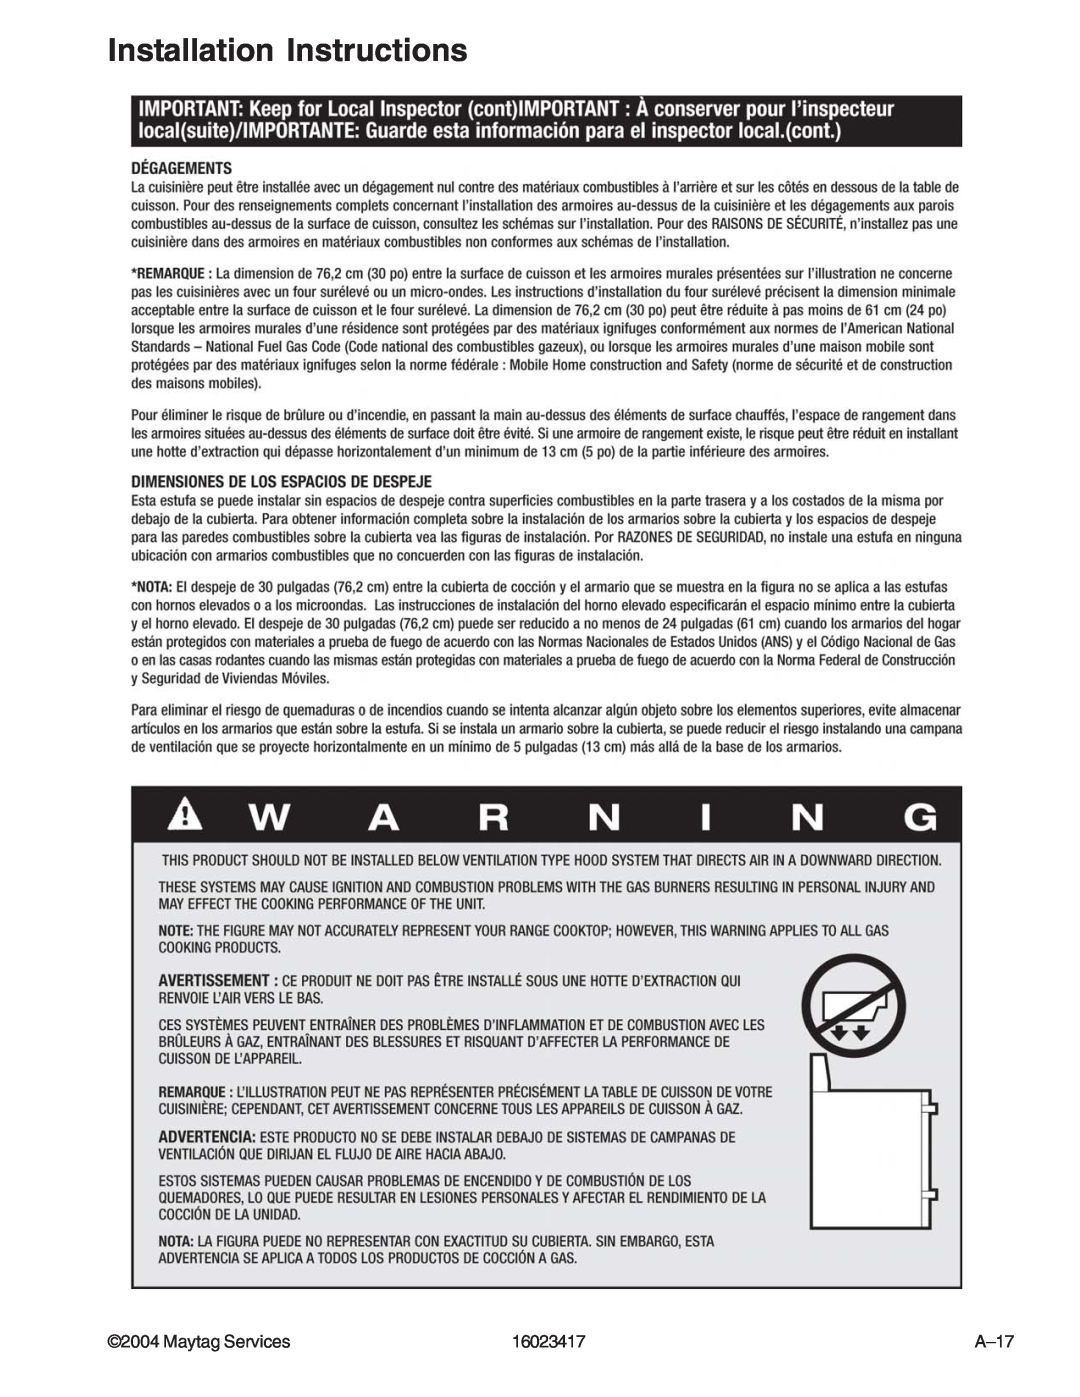 Jenn-Air JDR8895AAB/S/W, JDR8895ACS/W manual Installation Instructions, Maytag Services, 16023417, A–17 